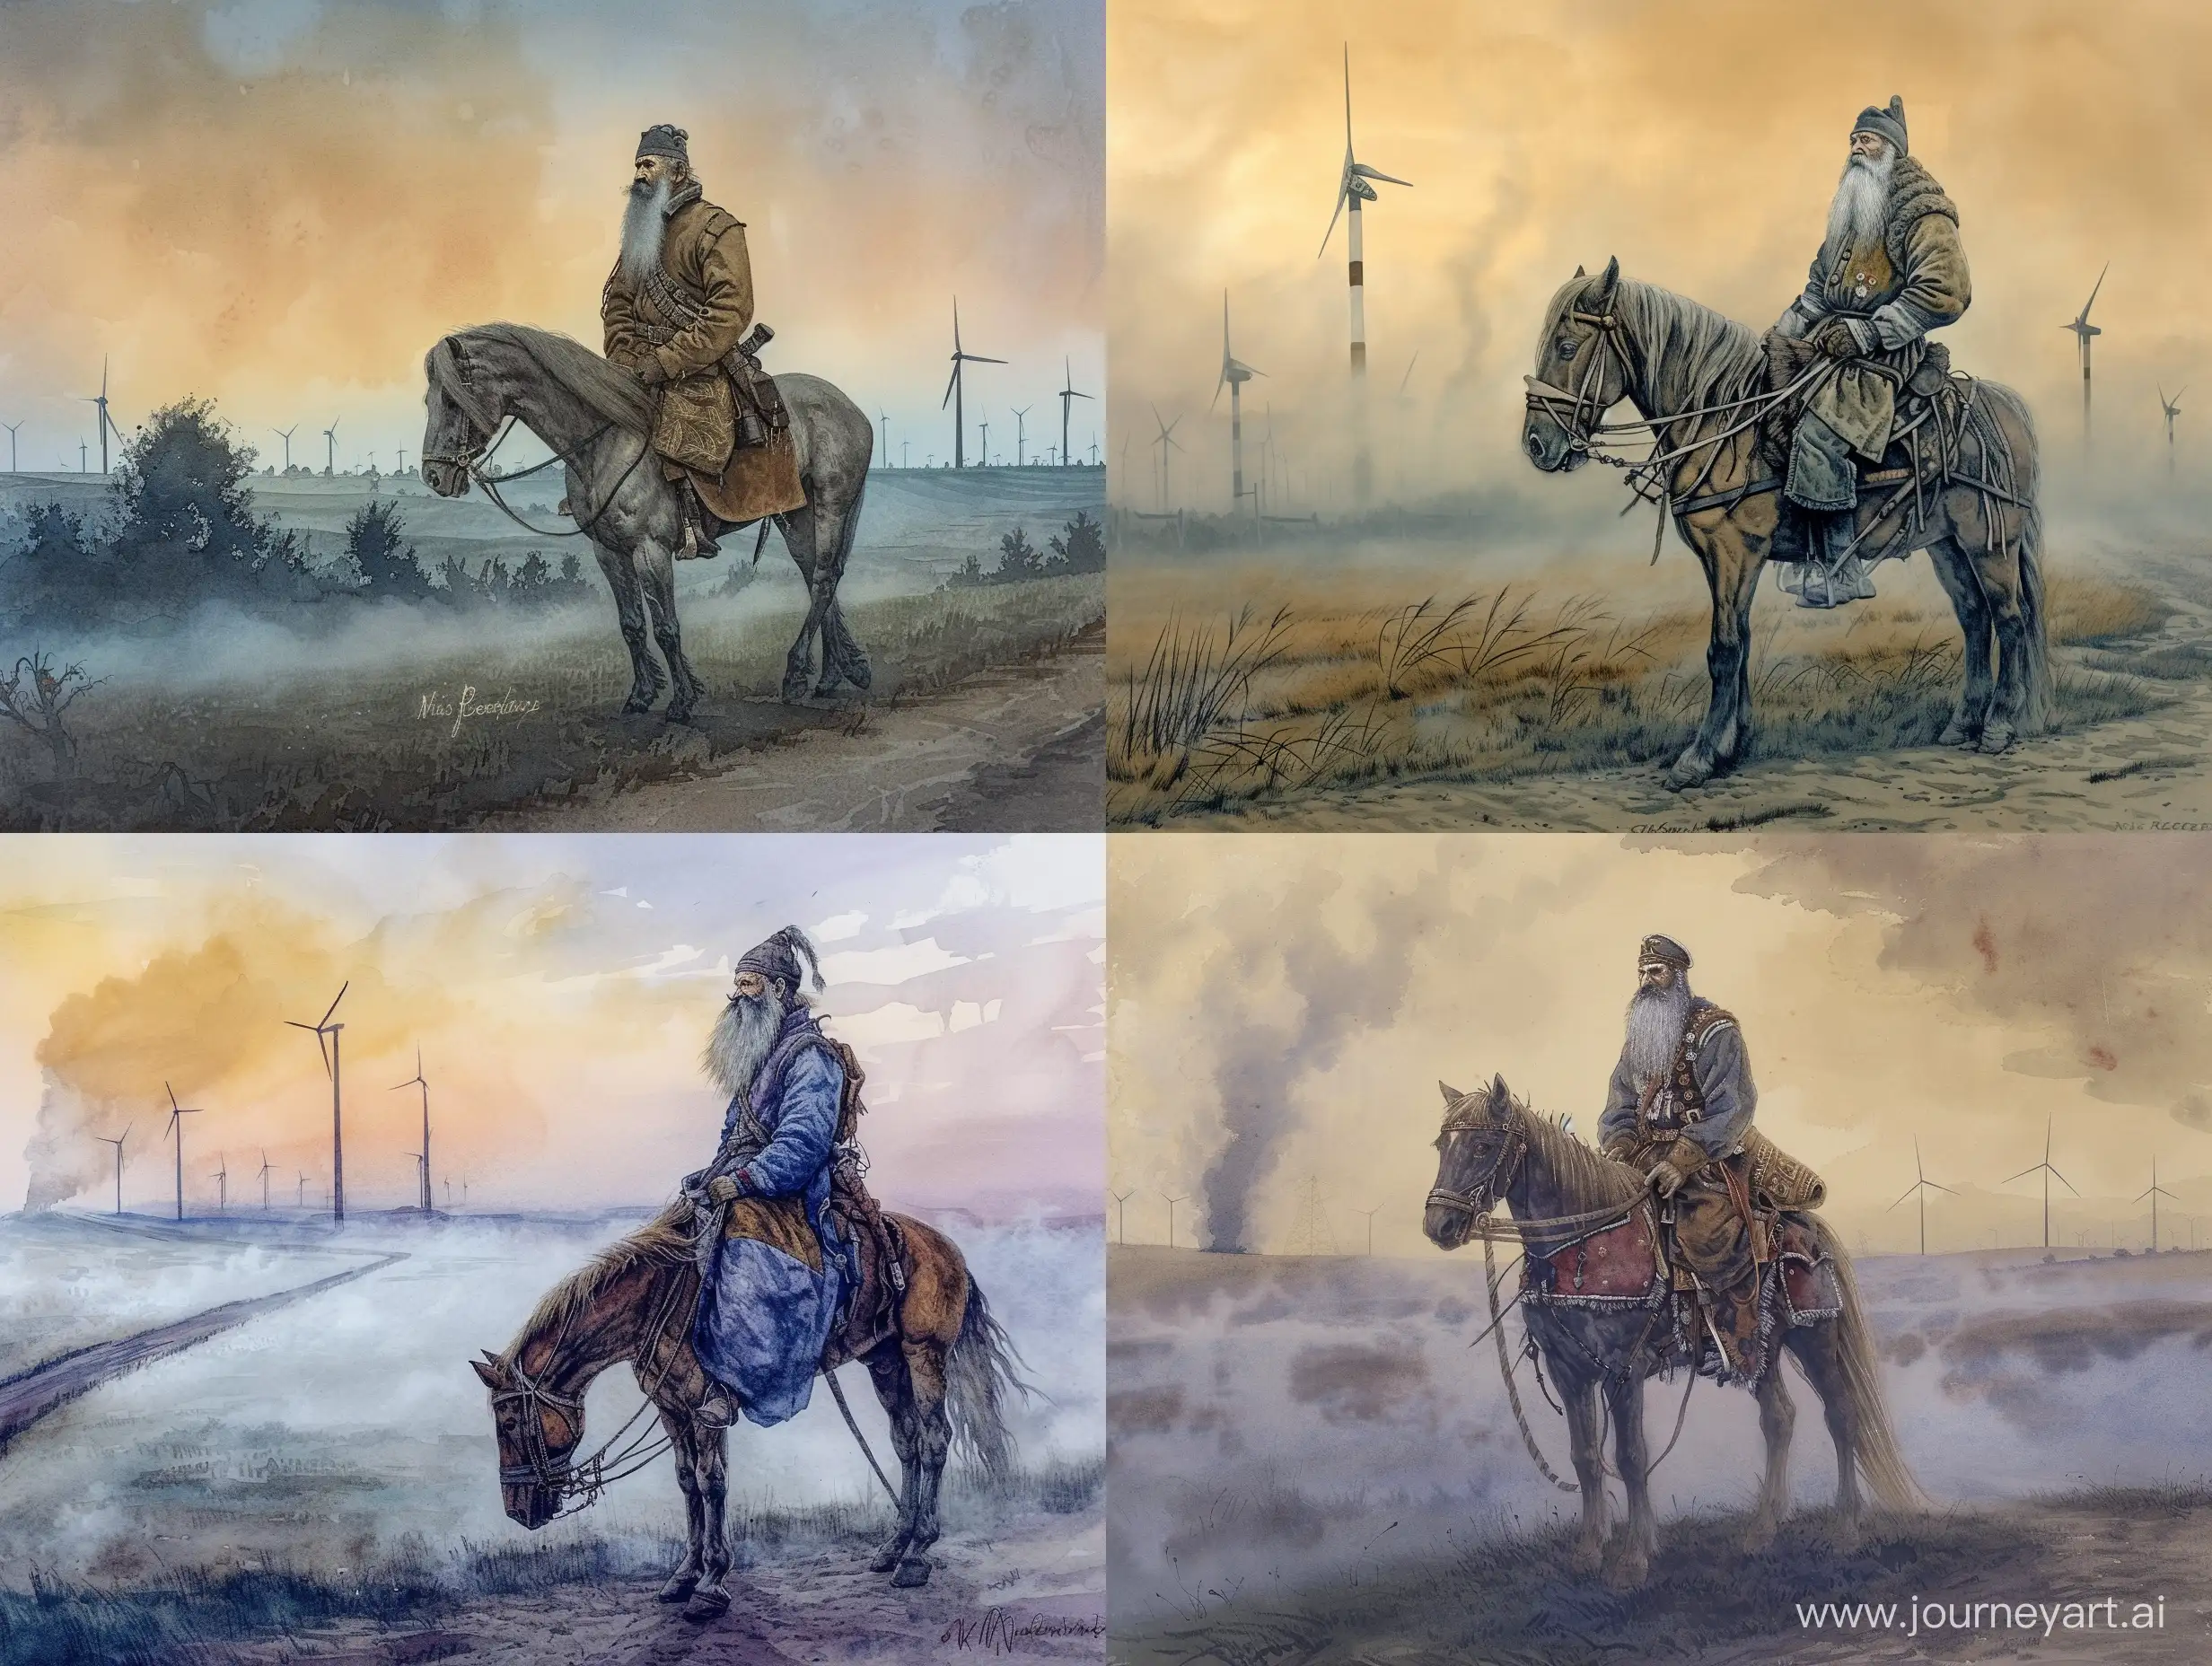 A rider with a long gray beard and mustache, sitting on a horse that stands sideways, Cossack clothes on the rider, evening lighting, fog creeping over the ground, against the background of a field with wind turbines, watercolor style, ink, Nicholas Roerich